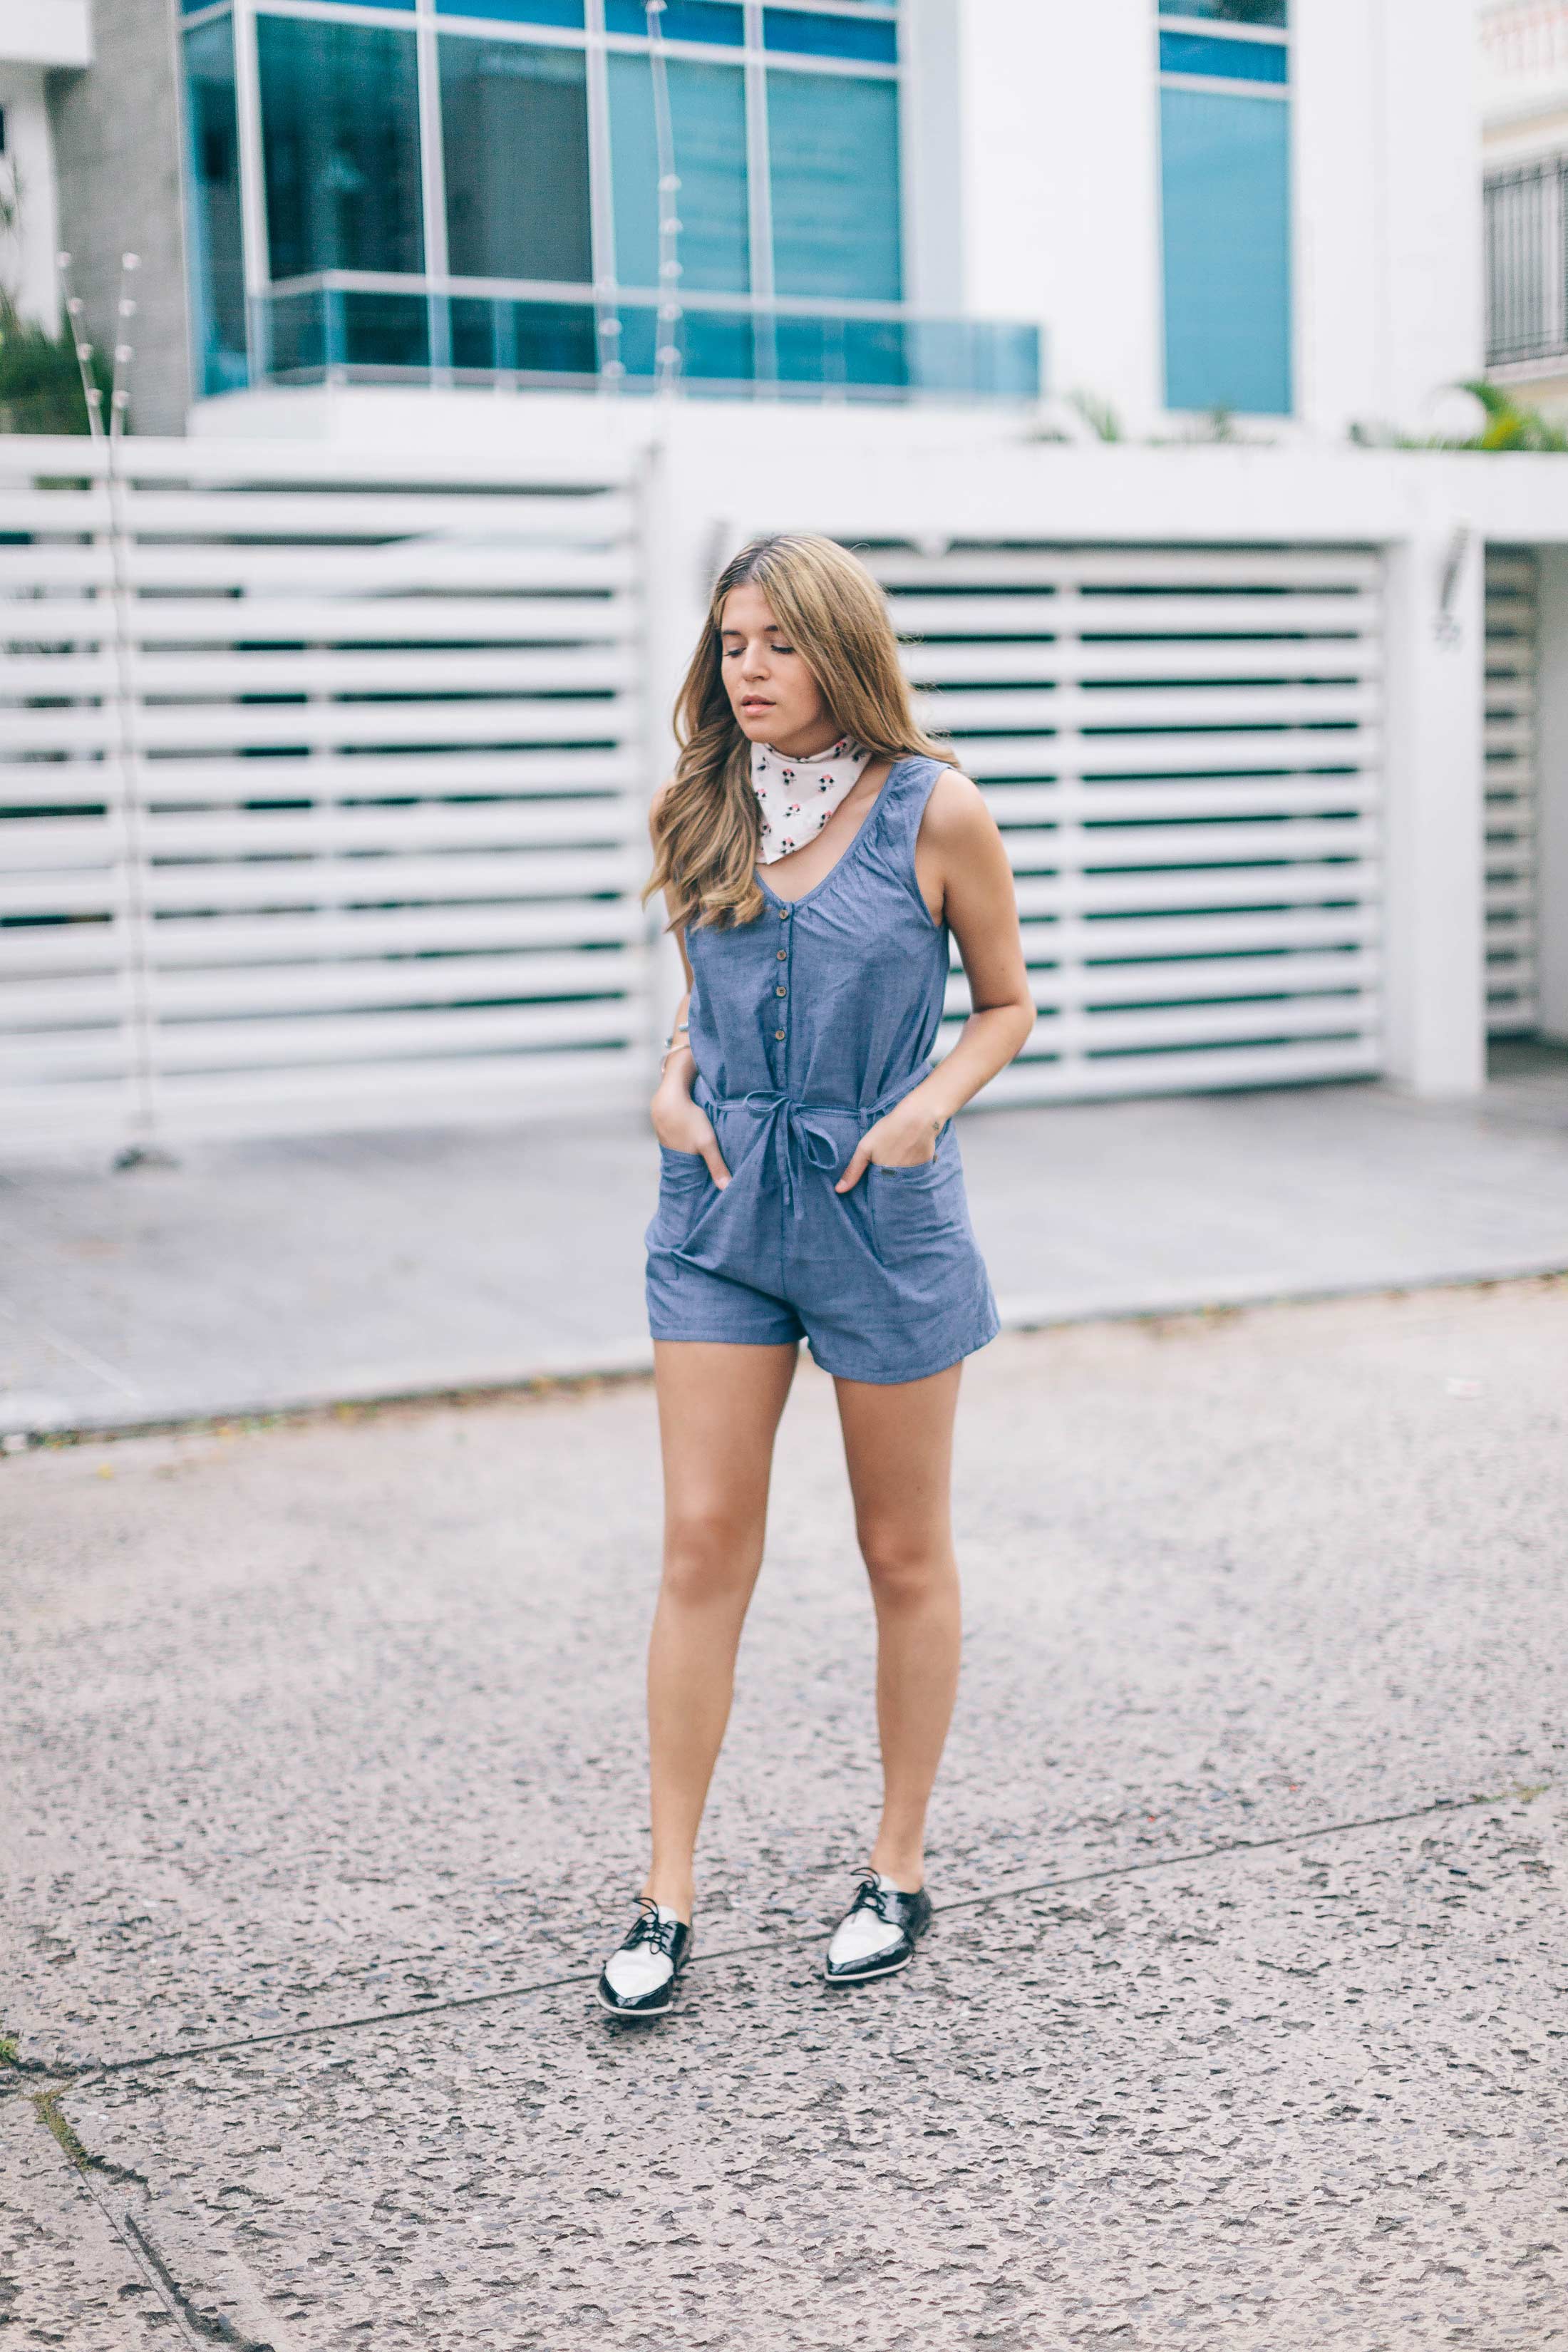 Chambray onesie perfect for summer BBQs, concerts or weekend getaways